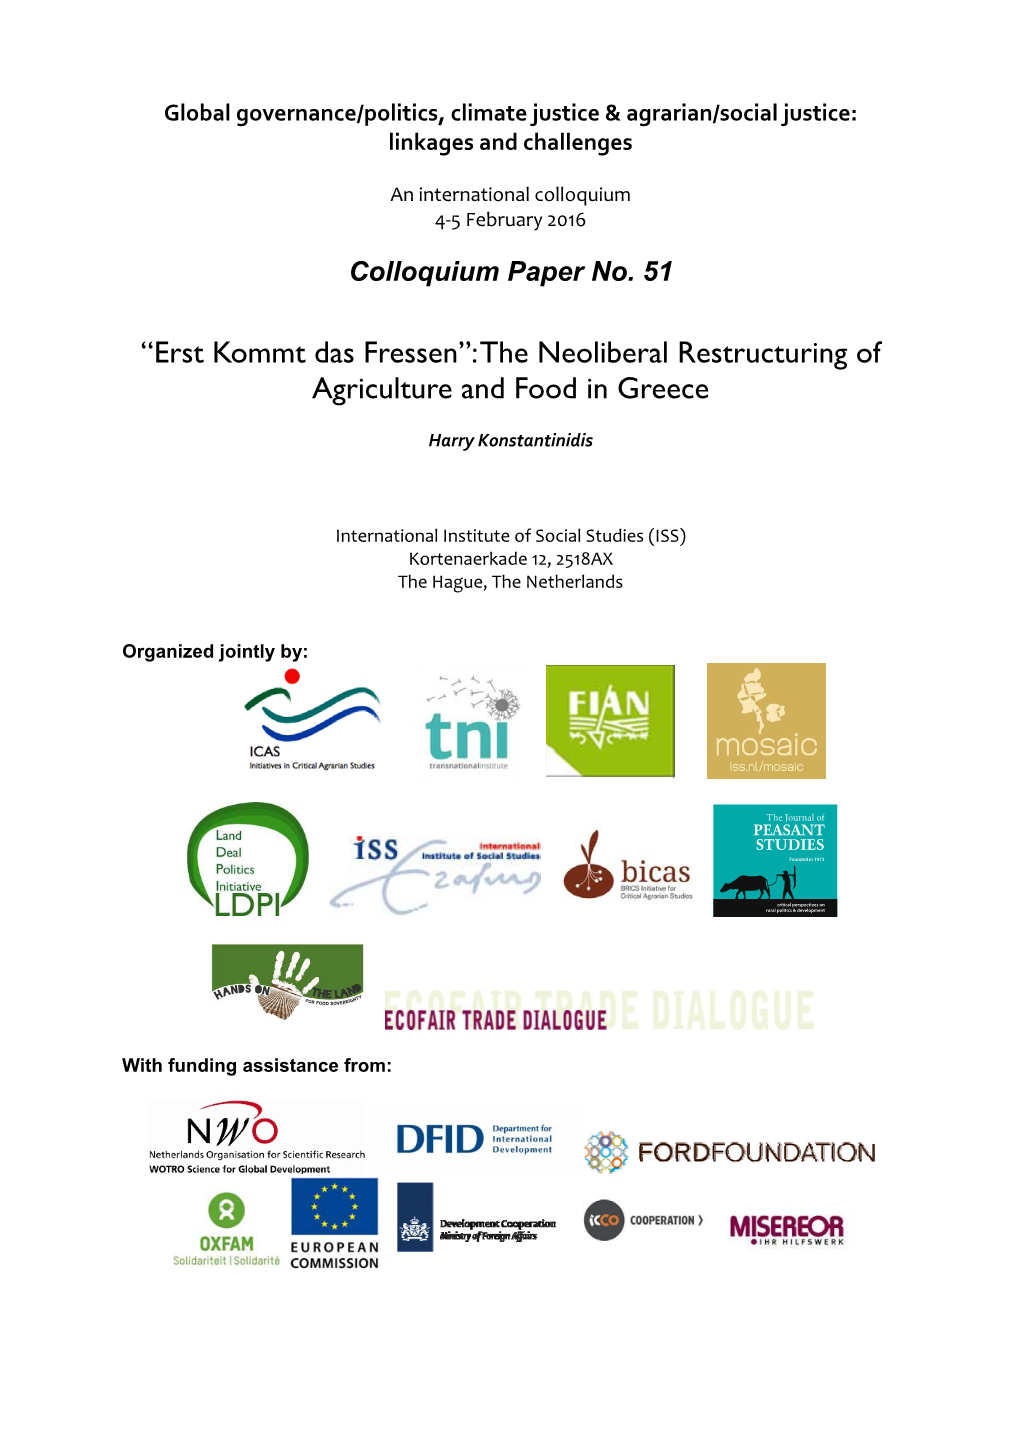 The Neoliberal Restructuring of Agriculture and Food in Greece